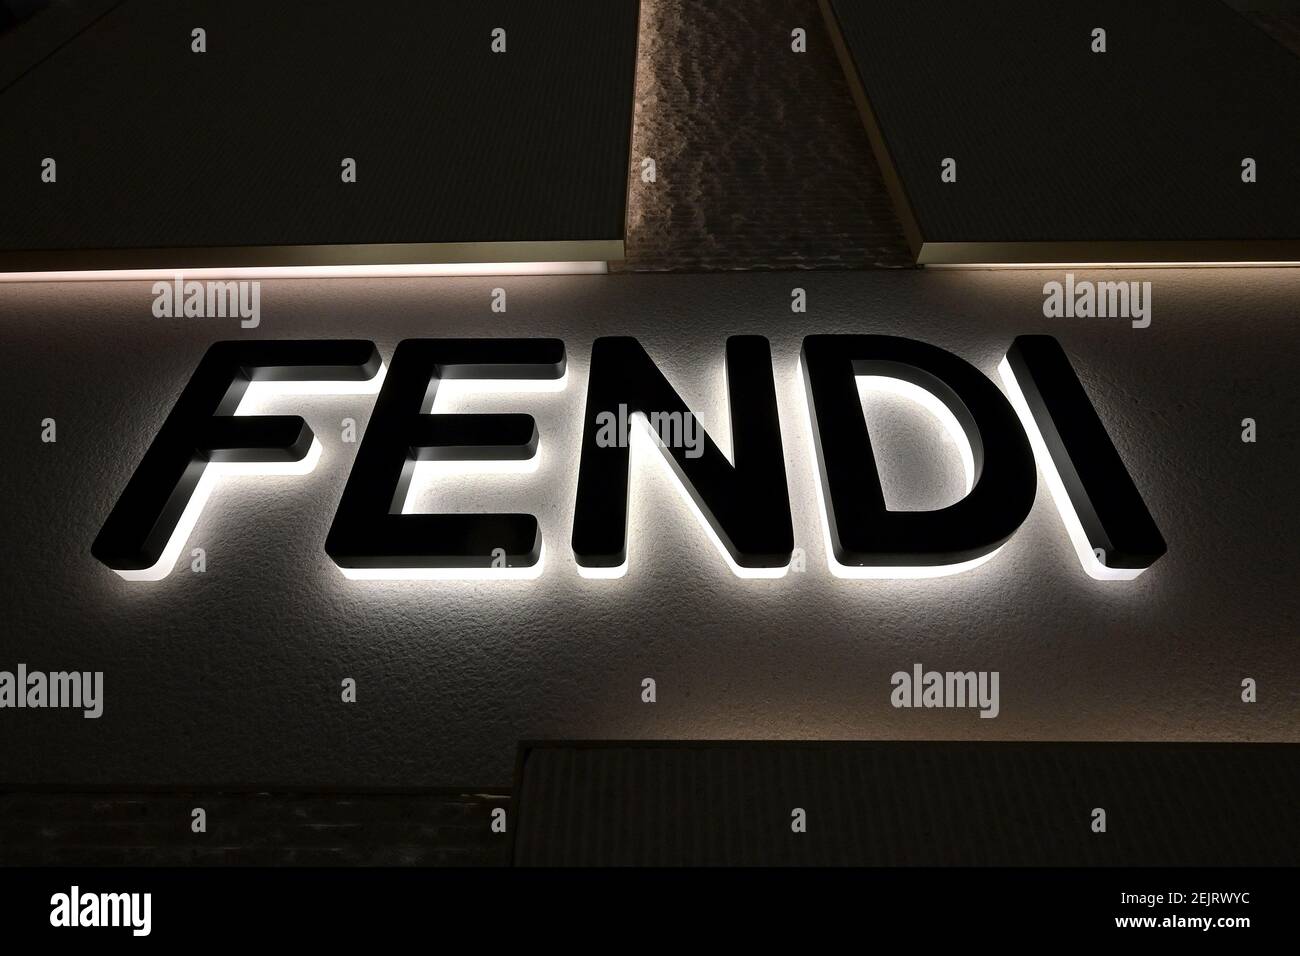 Fendi HD Wallpapers and Backgrounds